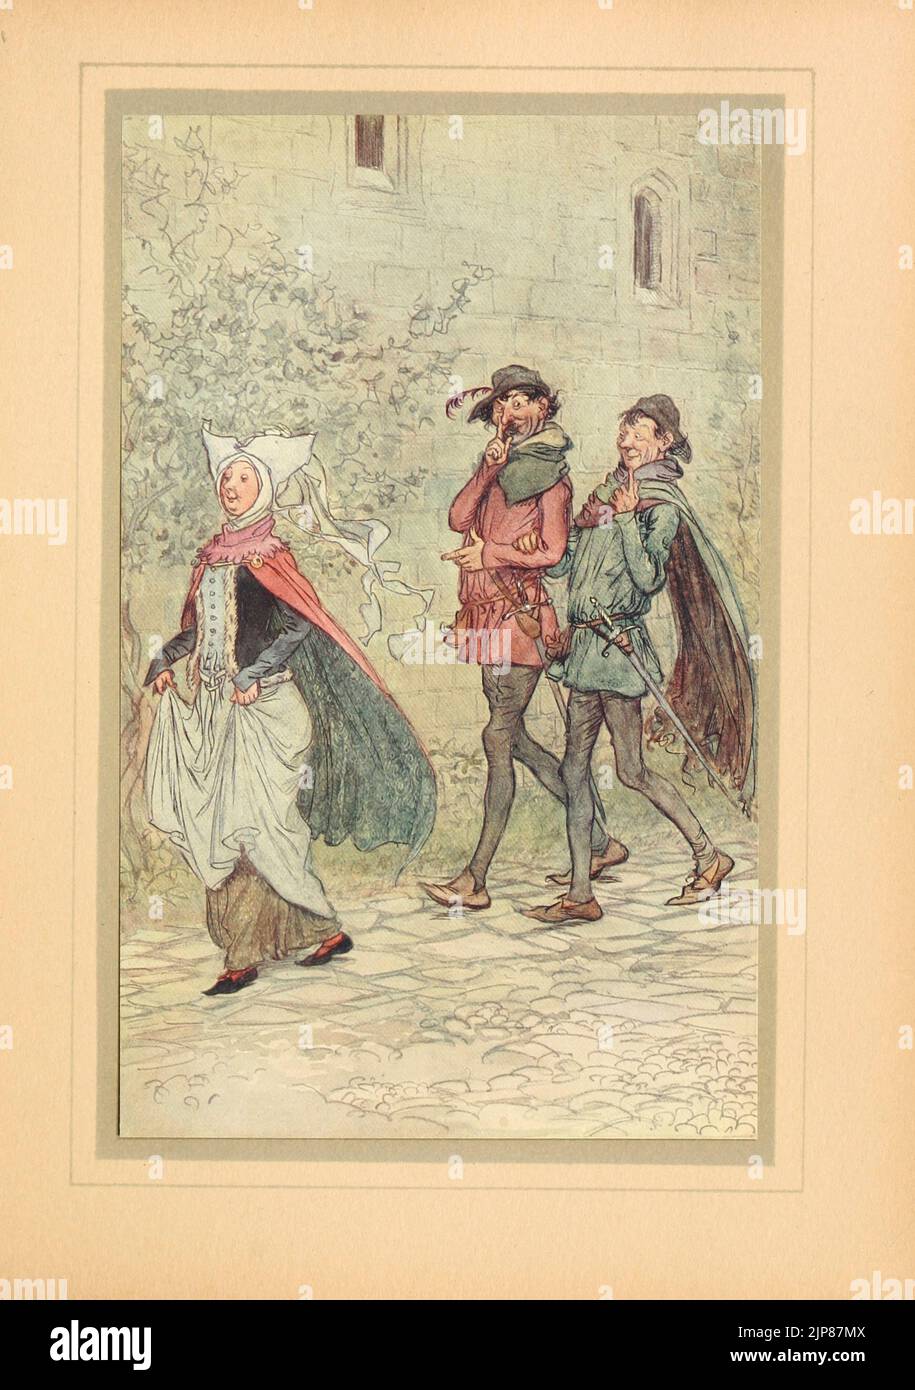 When Mrs. Bridget lost the handle of her fan from the book ' The merry wives of Windsor ' by  William Shakespeare Illustrated by Hugh Thomson, Publication date 1910 Publisher New York : F.A. Stokes The Merry Wives of Windsor or Sir John Falstaff and the Merry Wives of Windsor is a comedy by William Shakespeare first published in 1602, Stock Photo